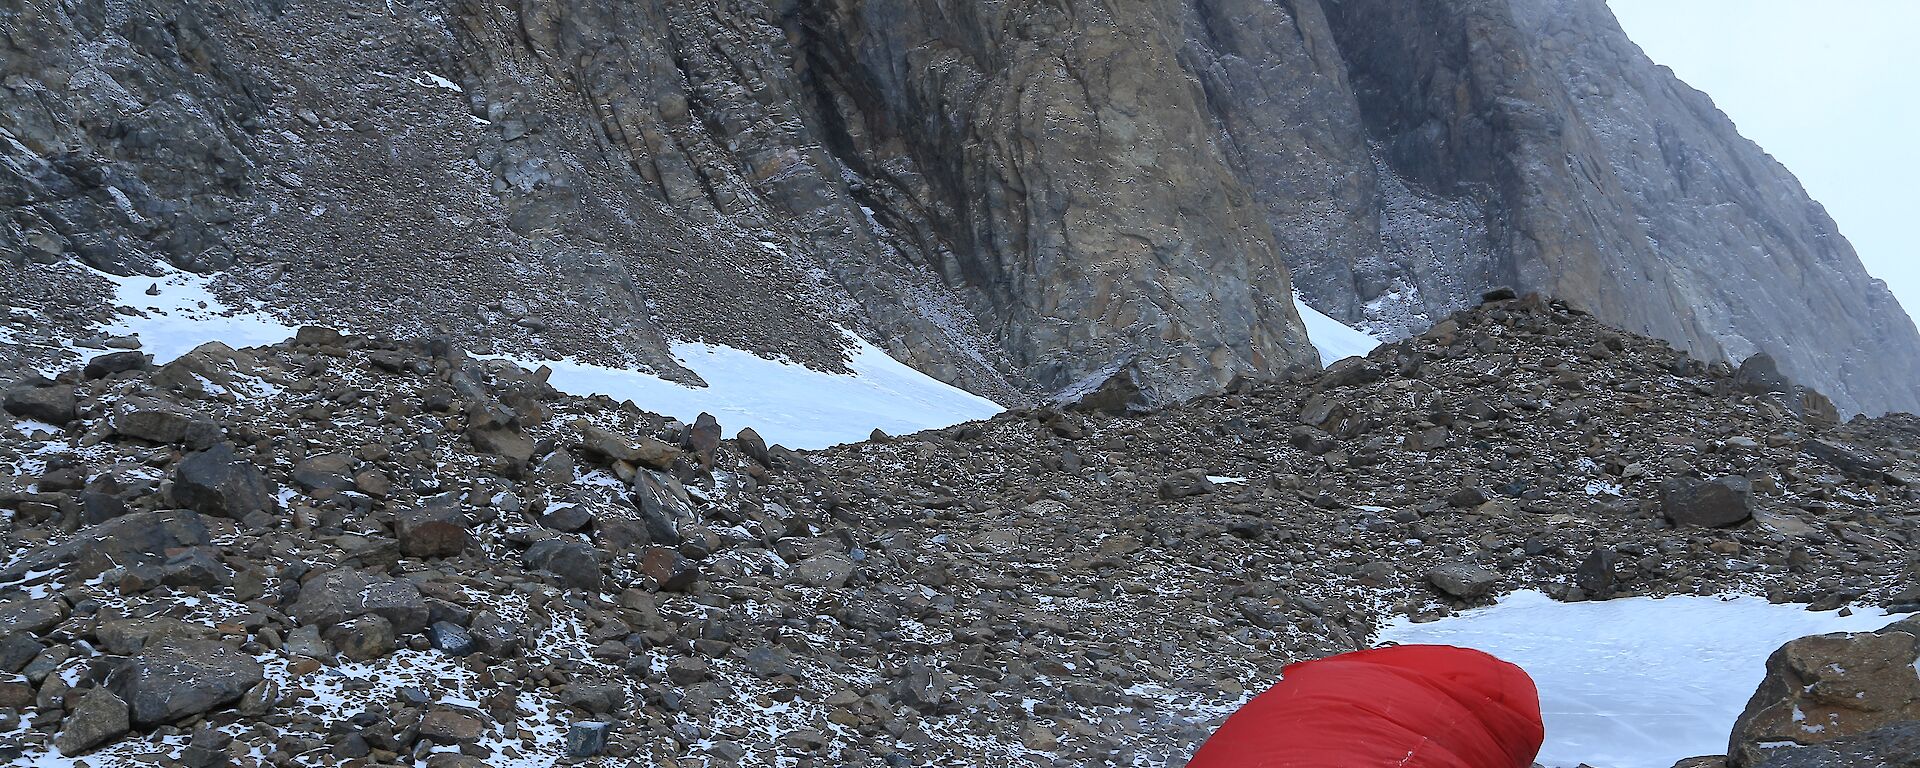 A red bivy bag on the rocks will keep you alive in bad weather